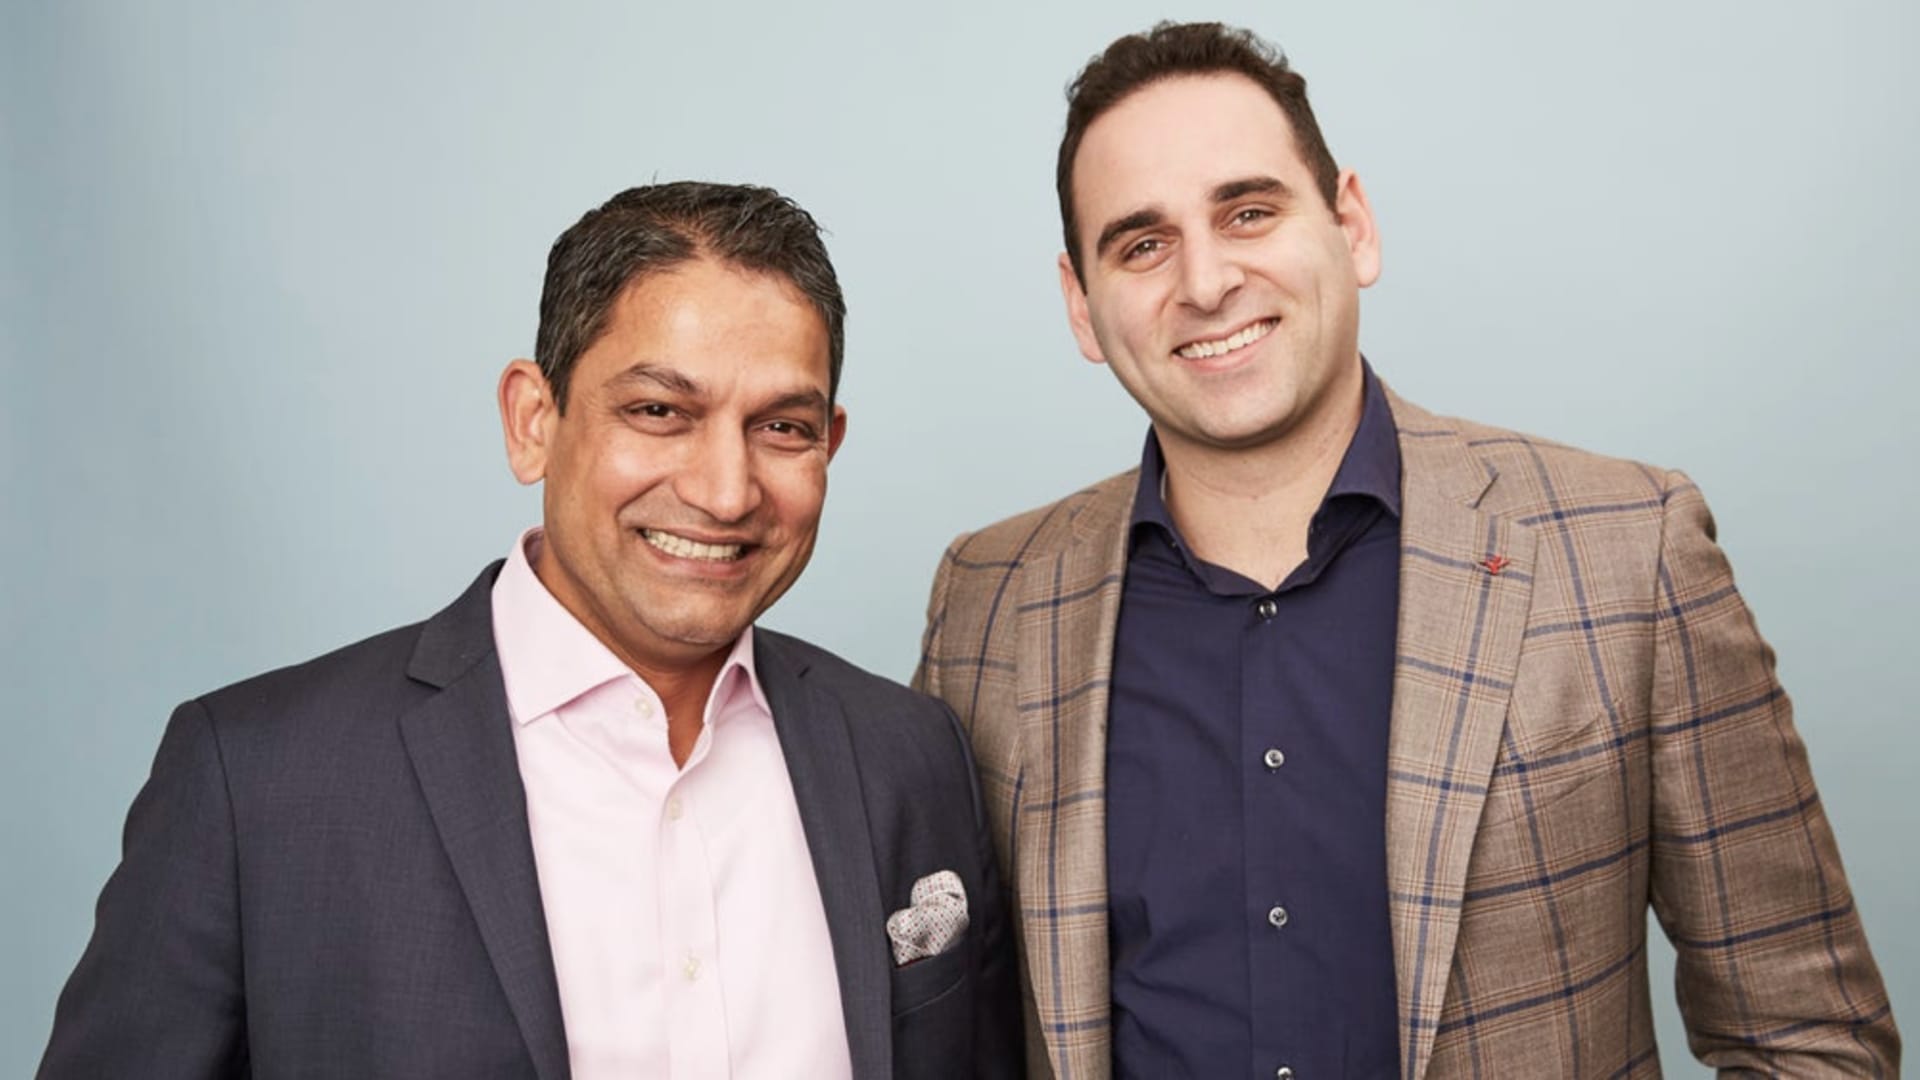 Yieldstreet co-founders Milind Mehere (L) and Michael Weisz